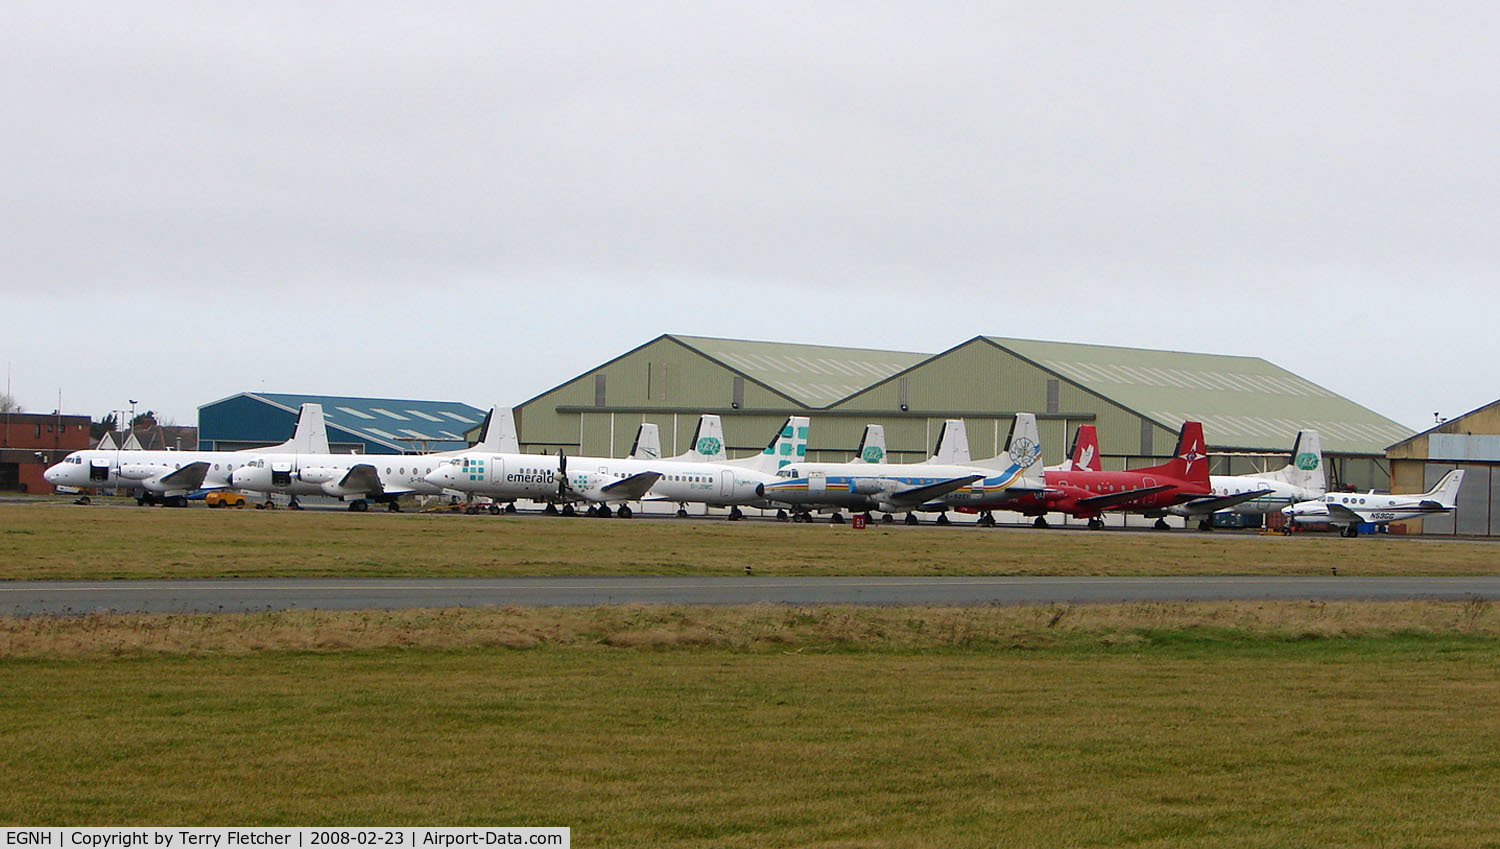 Blackpool International Airport, Blackpool, England United Kingdom (EGNH) - A Feb 2008 update of the aircraft (HS748 and ATP) still in storage at Blackpool